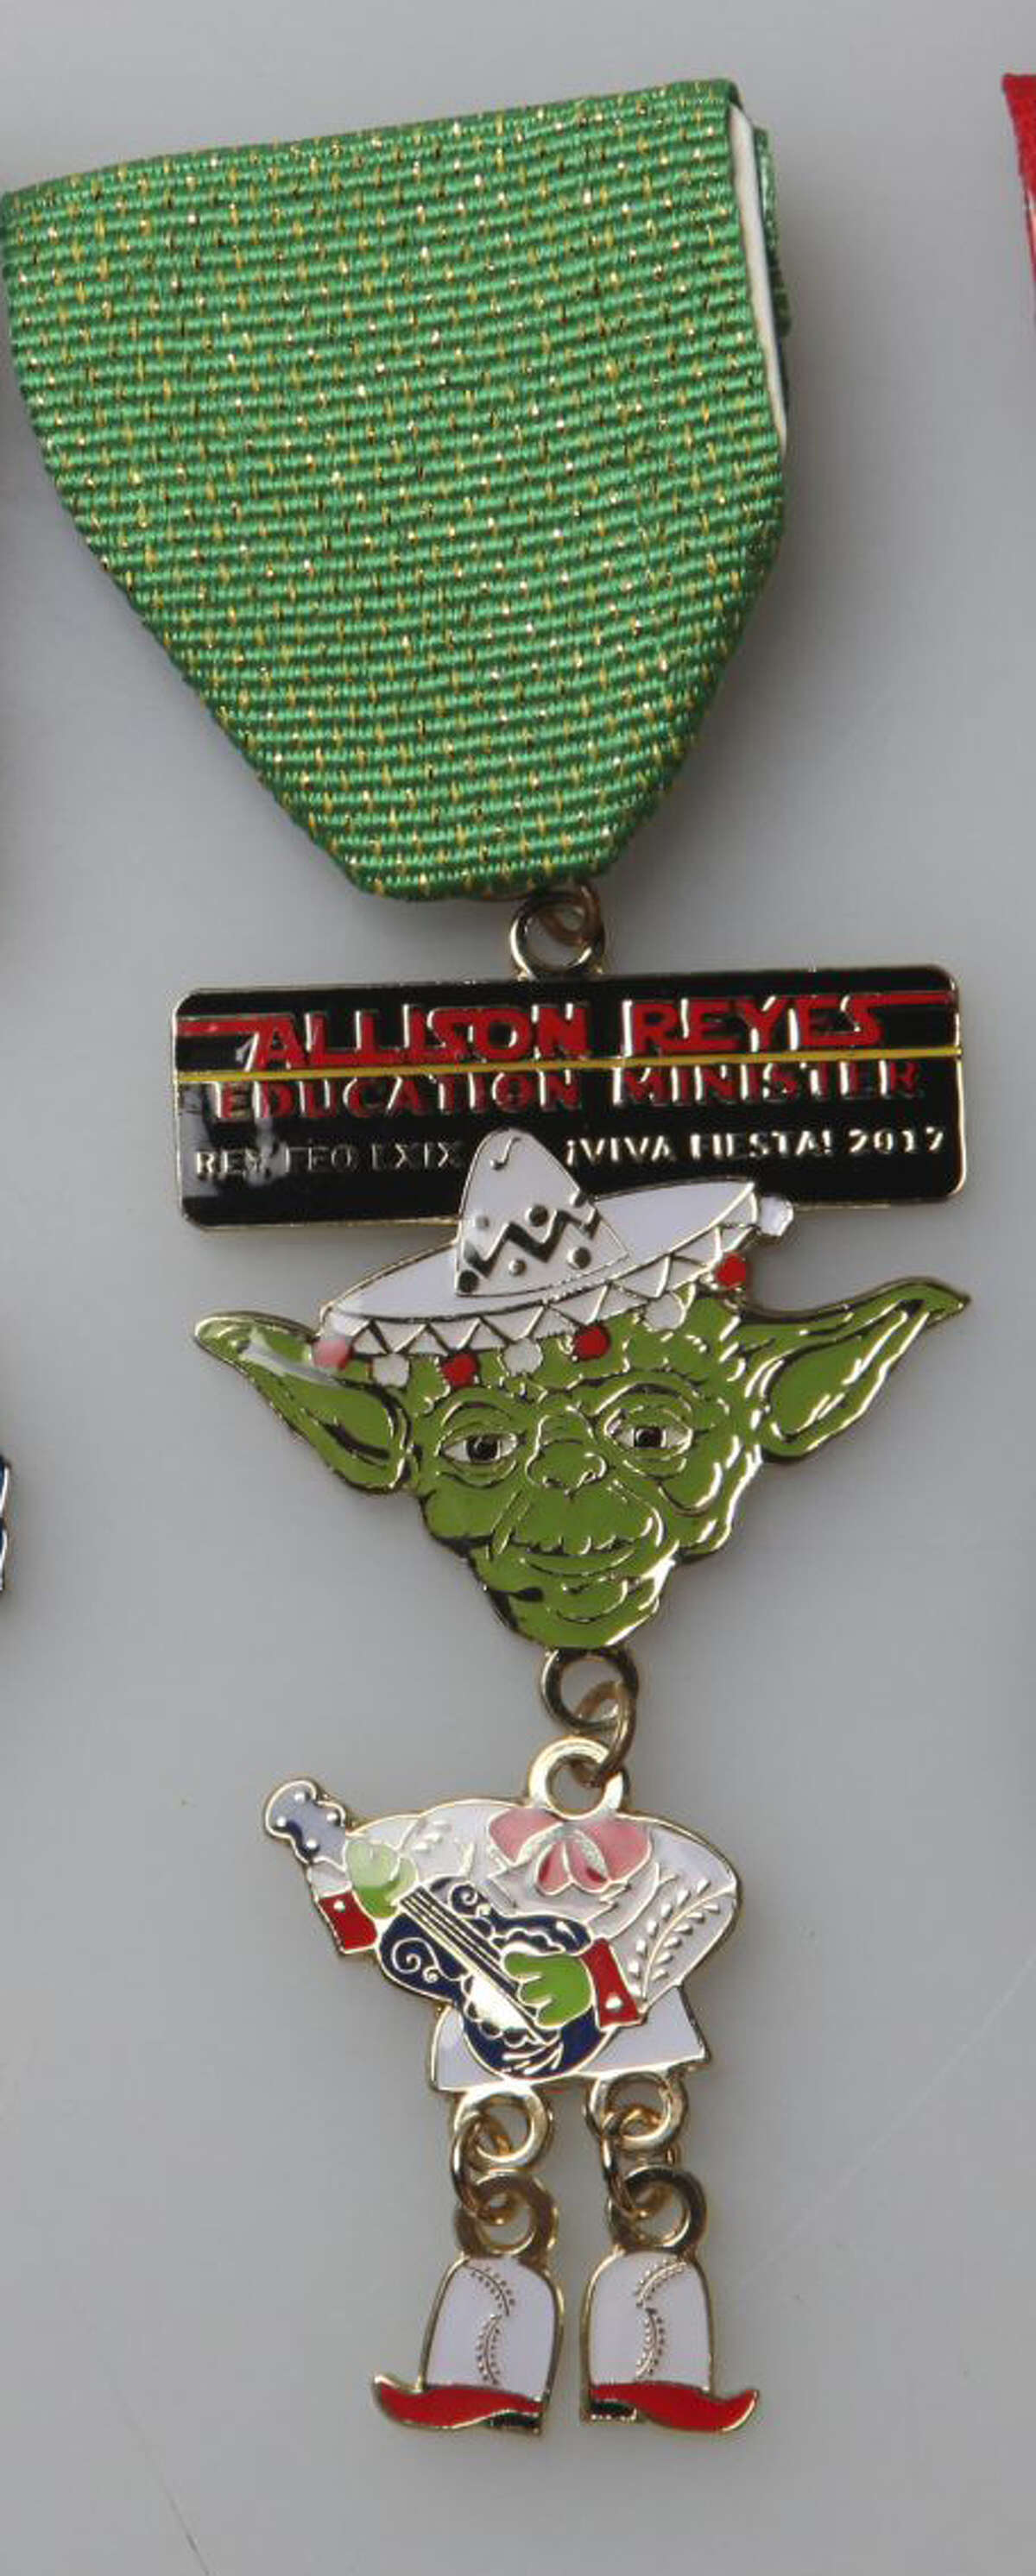 Rey Feo Education Minister Allison Reyes's medal shows Yoda.